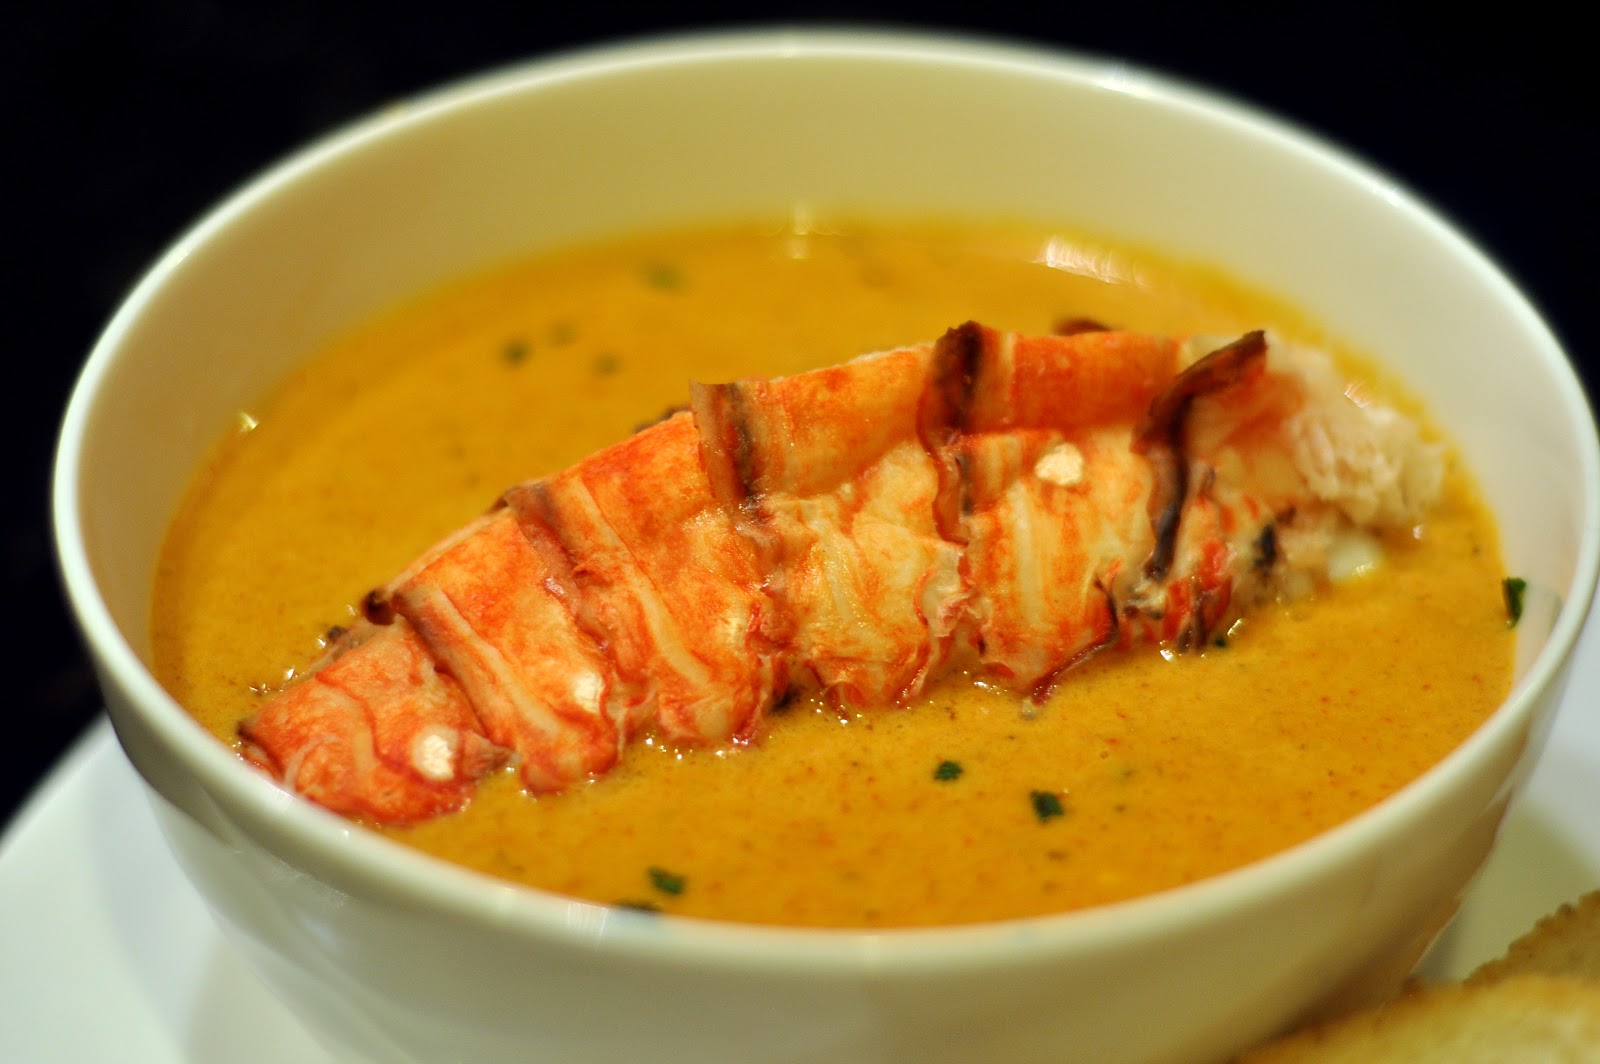 Party with Leah: Creamy Lobster Bisque